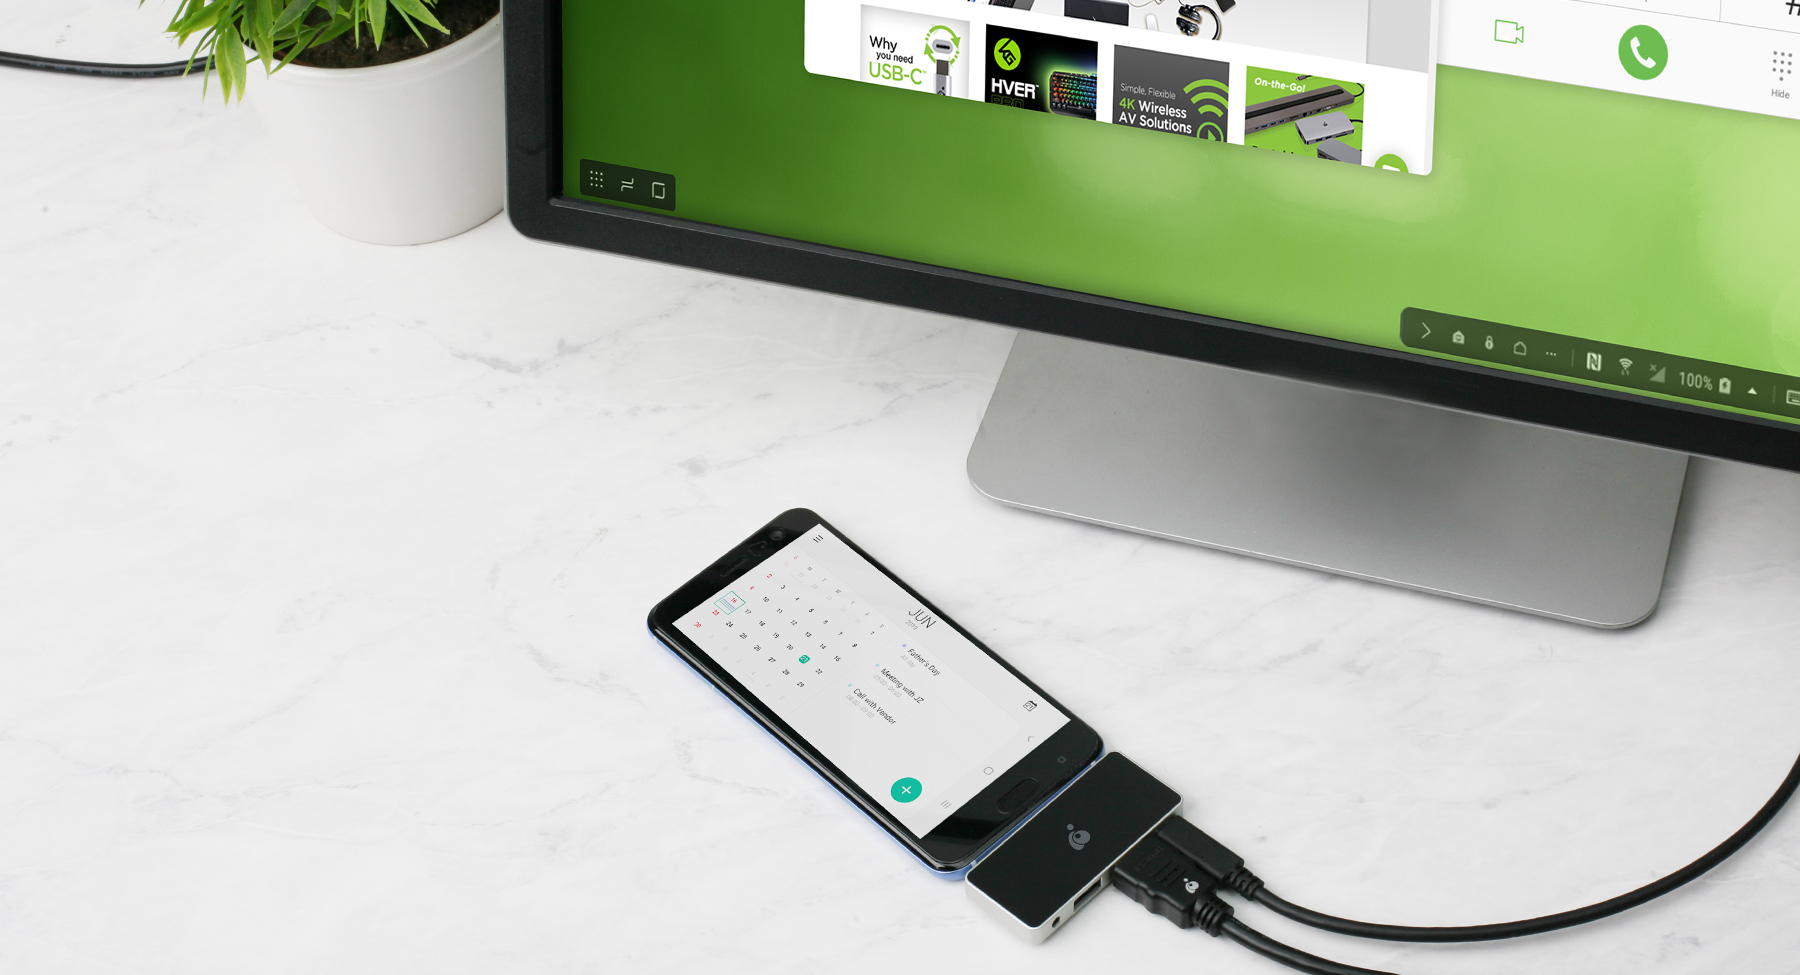 Tiny IOGEAR GUD3C460 USB-C docking station turns Android smartphone into a desktop NotebookCheck.net News